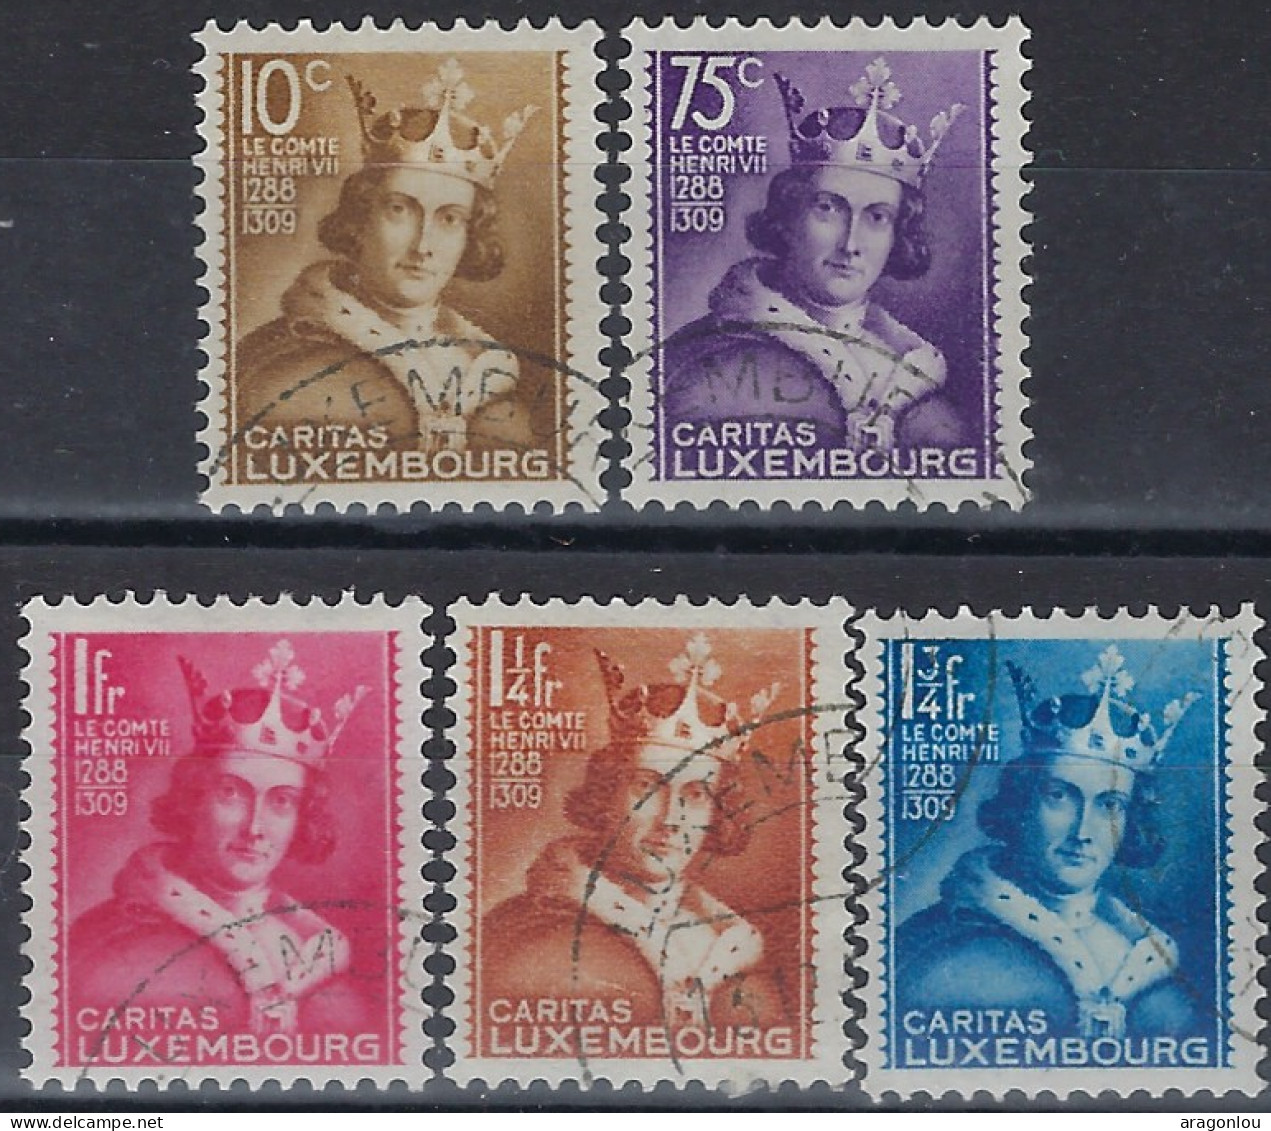 Luxembourg - Luxemburrg - Timbres  1933    Henri IV      Série   ° - Gebraucht